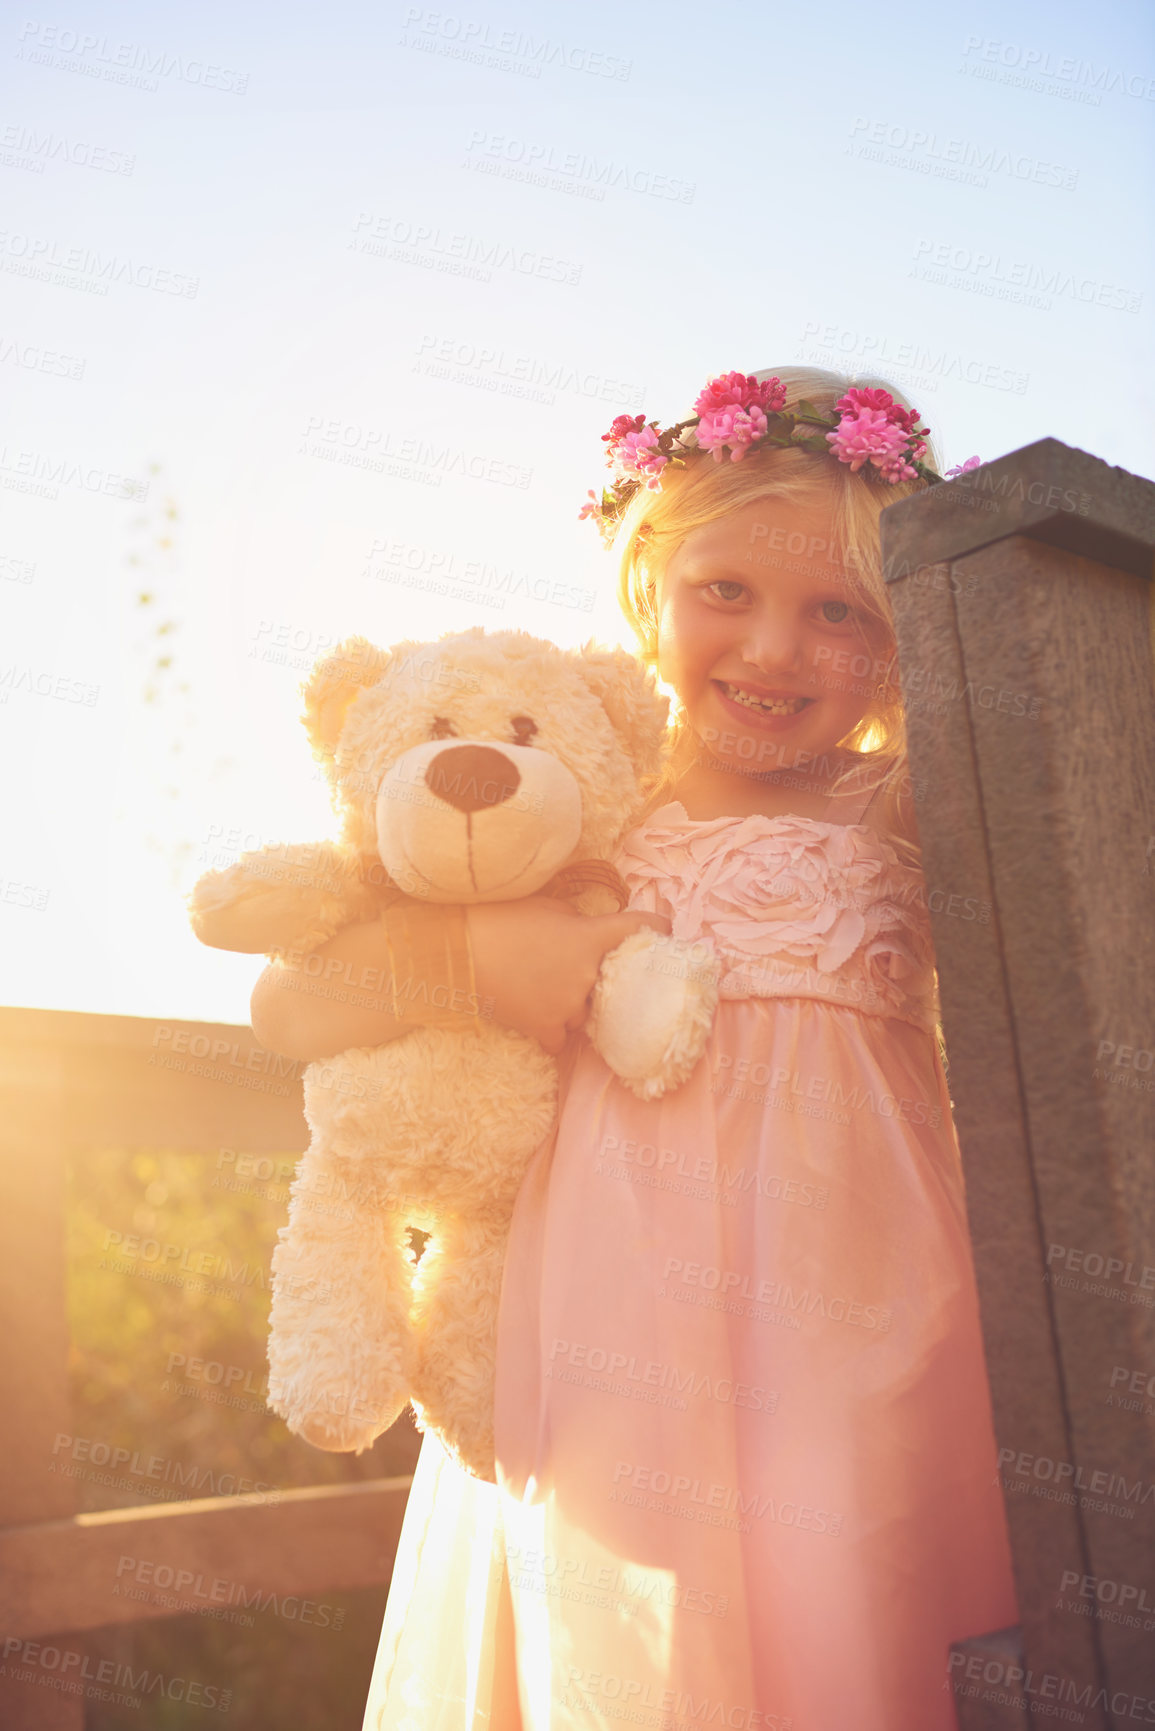 Buy stock photo Shot of a happy little girl holding a teddy bear and looking at the camera while standing on a bridge